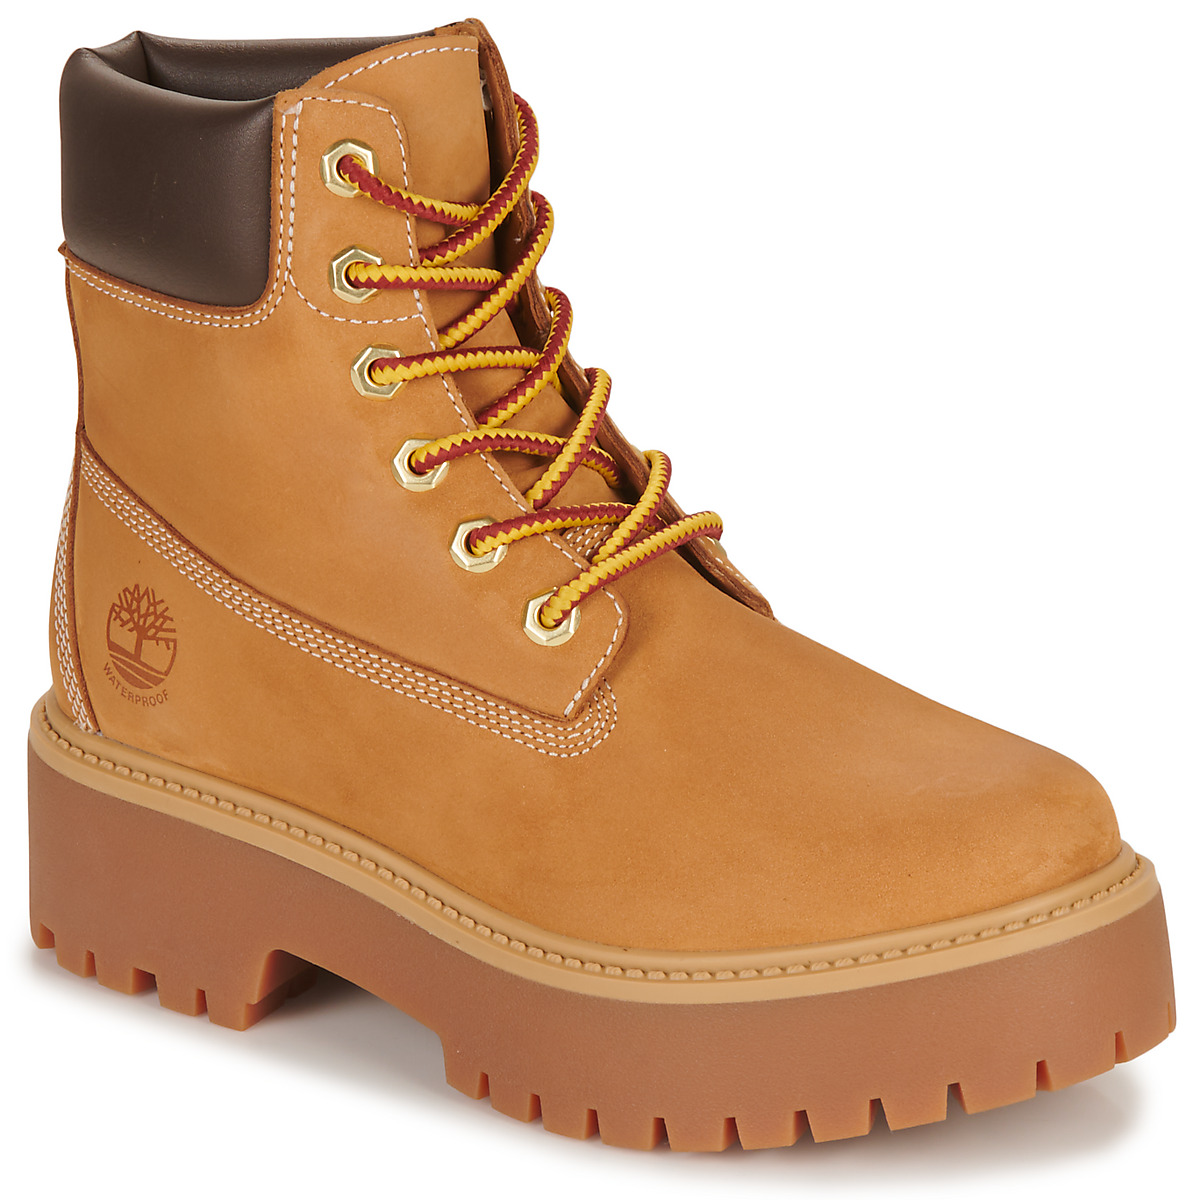 Timberland Camel TBL PREMIUM ELEVATED 6 IN WP dcegZB2e